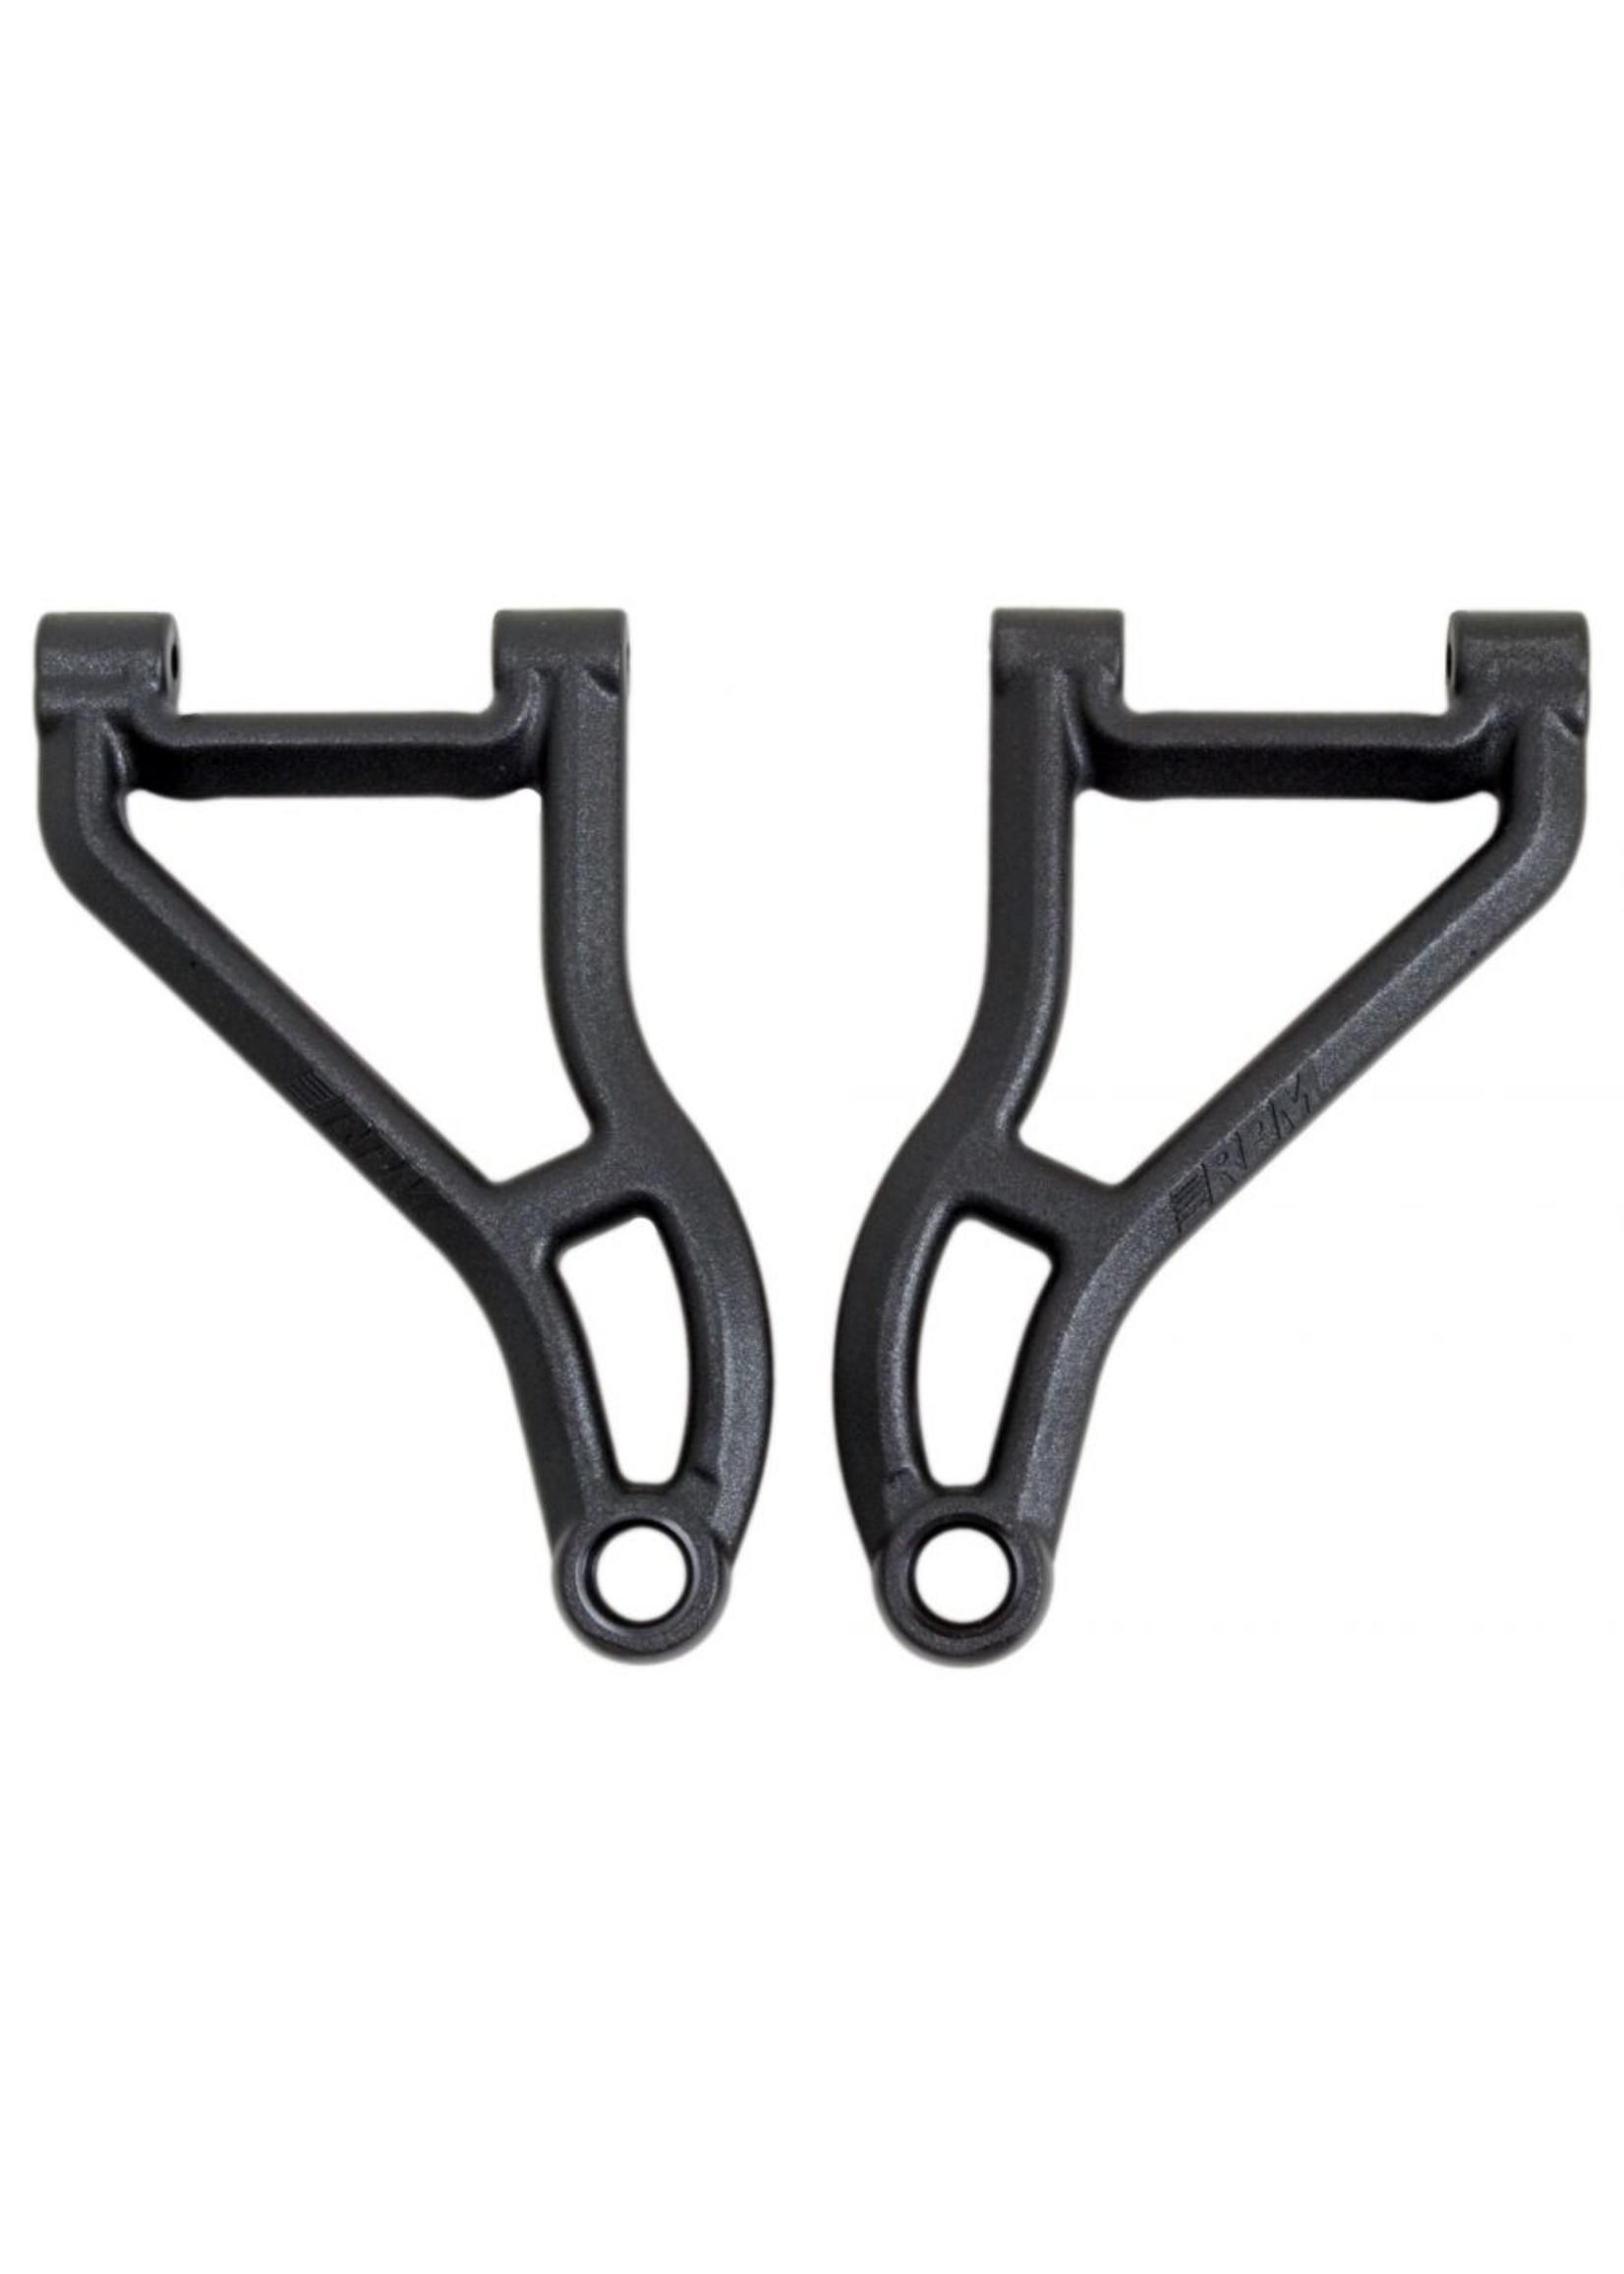 RPM 81382 - Front Upper A-arms for Traxxas Unlimited Desert Racer - Black